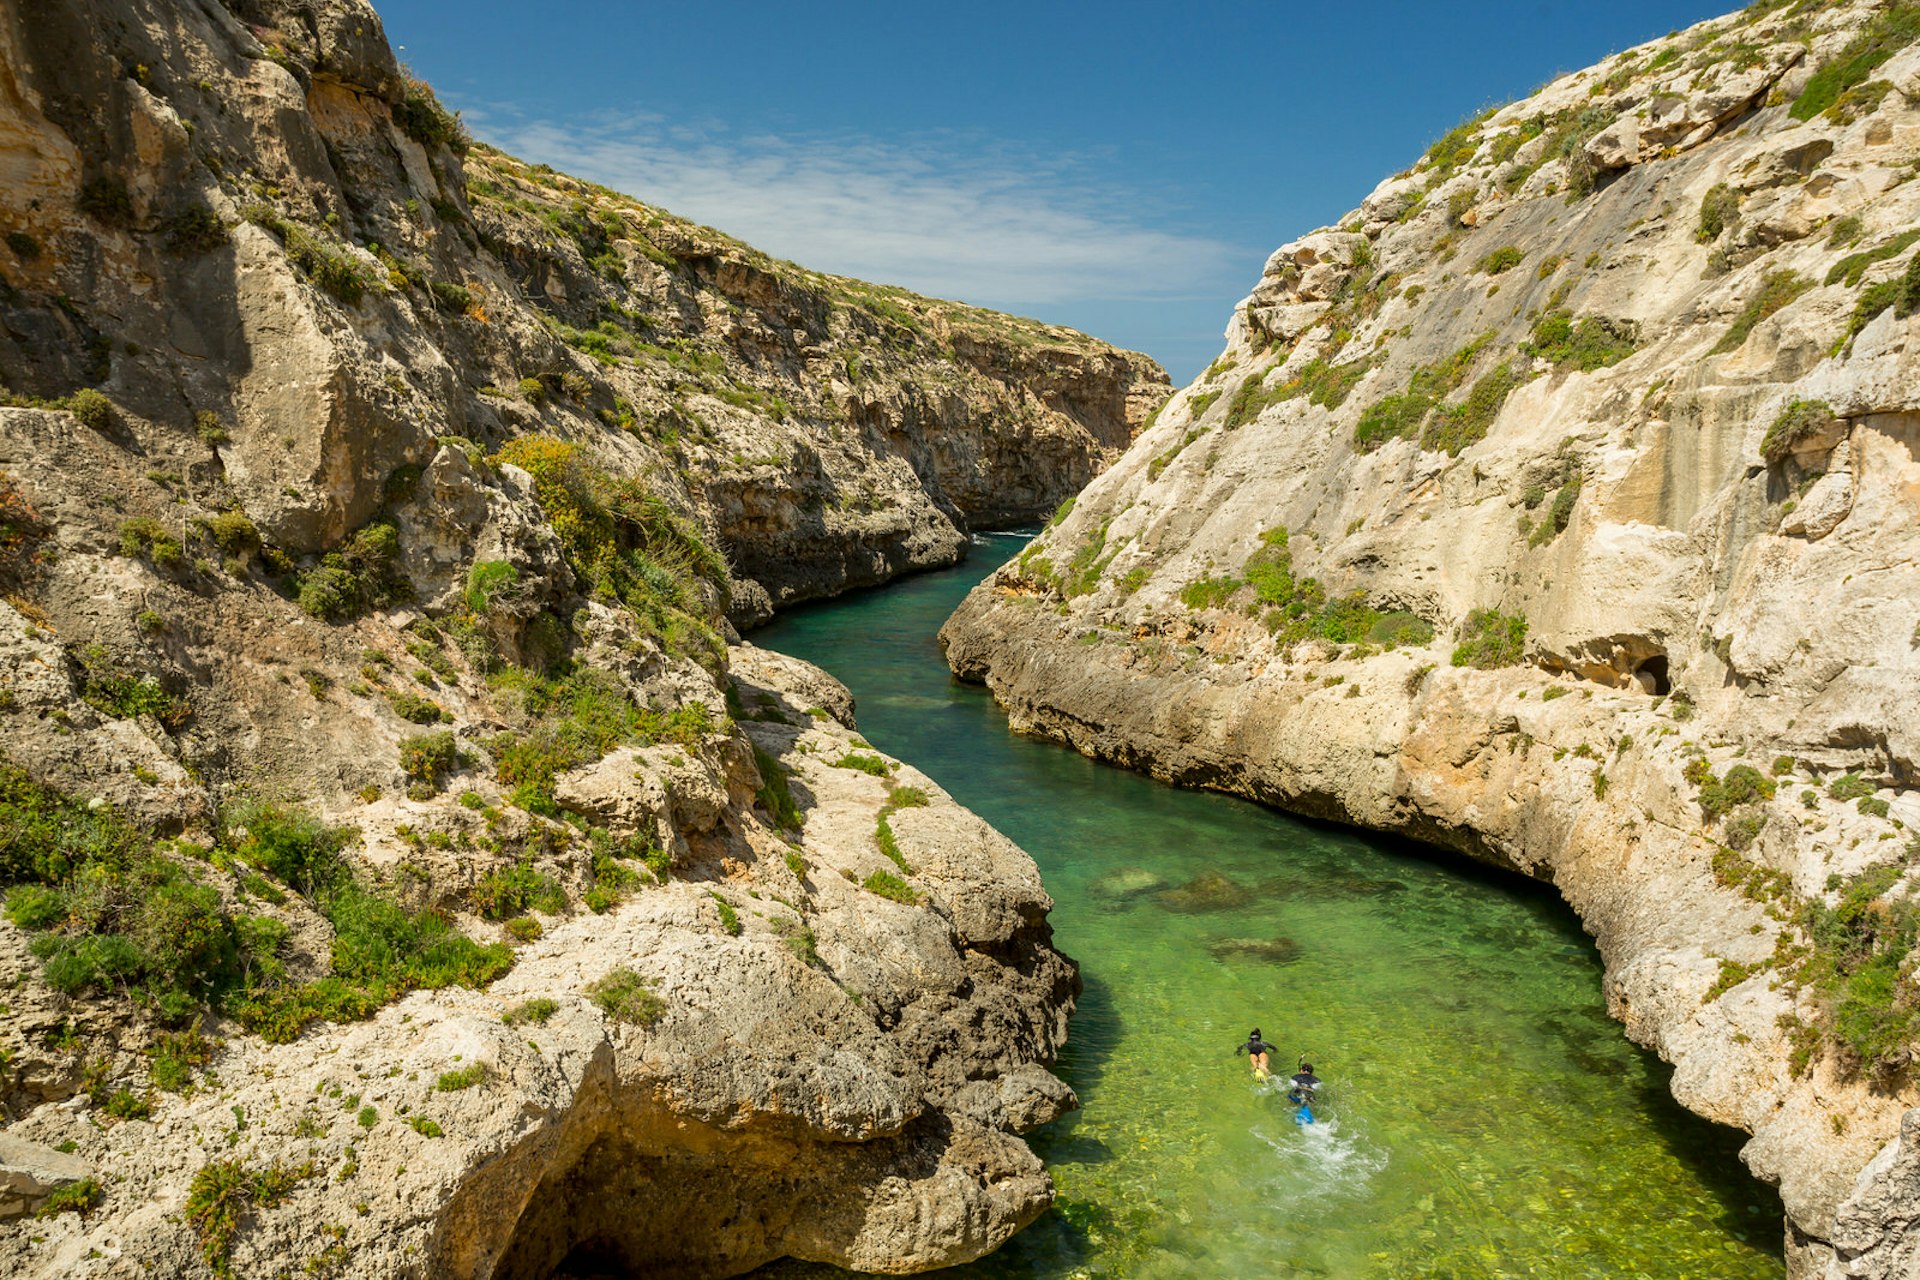 Wied il- Għasri in Malta is a narrow 'river' of sea water, running from the sea to a small sandy beach. In this image, two snorkellers swim through the narrow passage, with steep rock faces on either side of them 